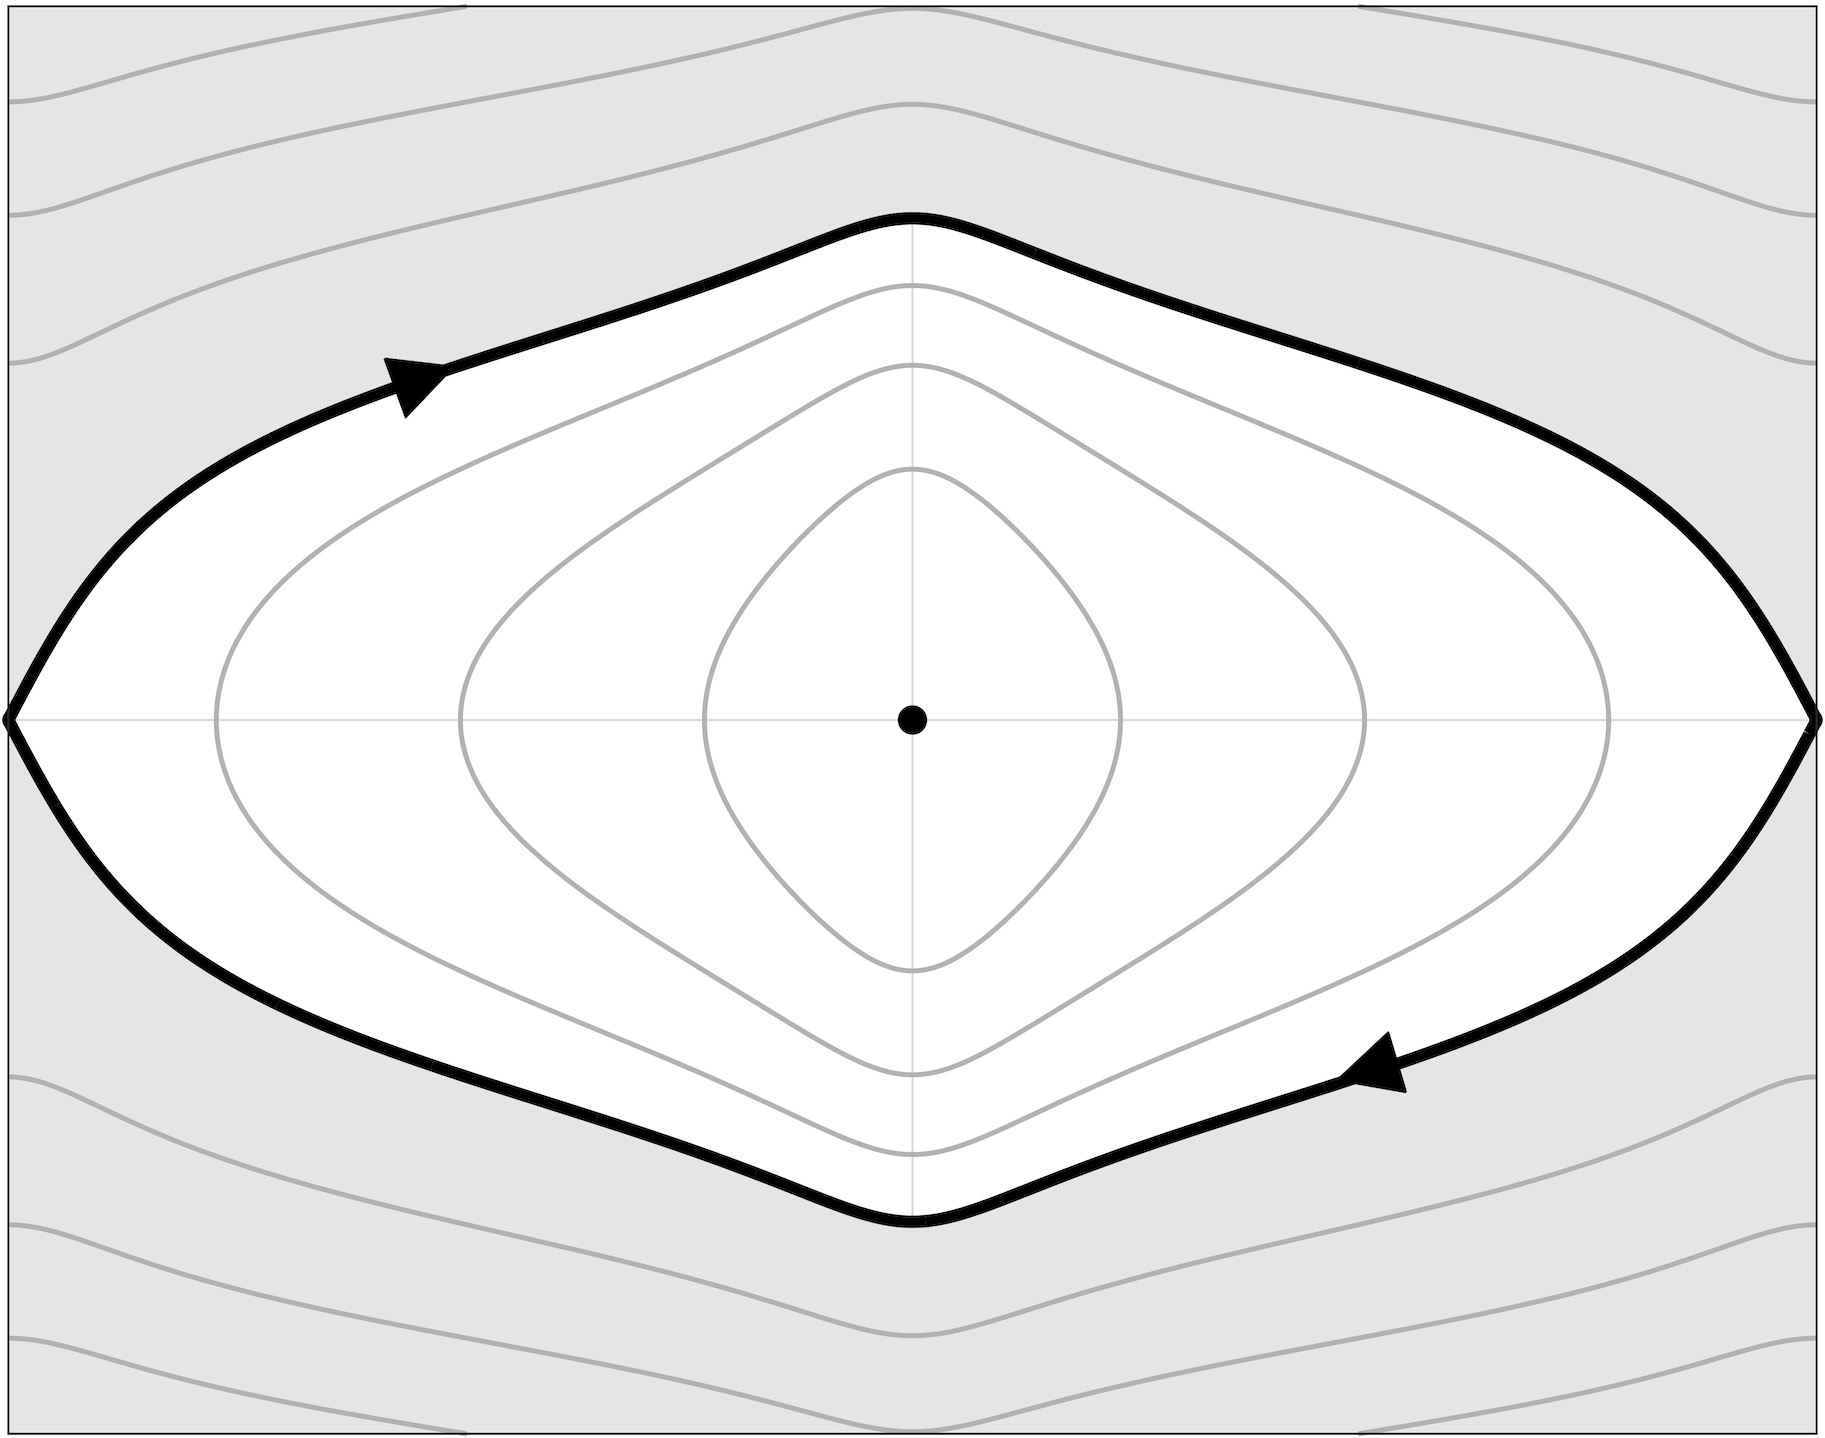 Closed trajectories in semi-periodic phase-space (angle-position).